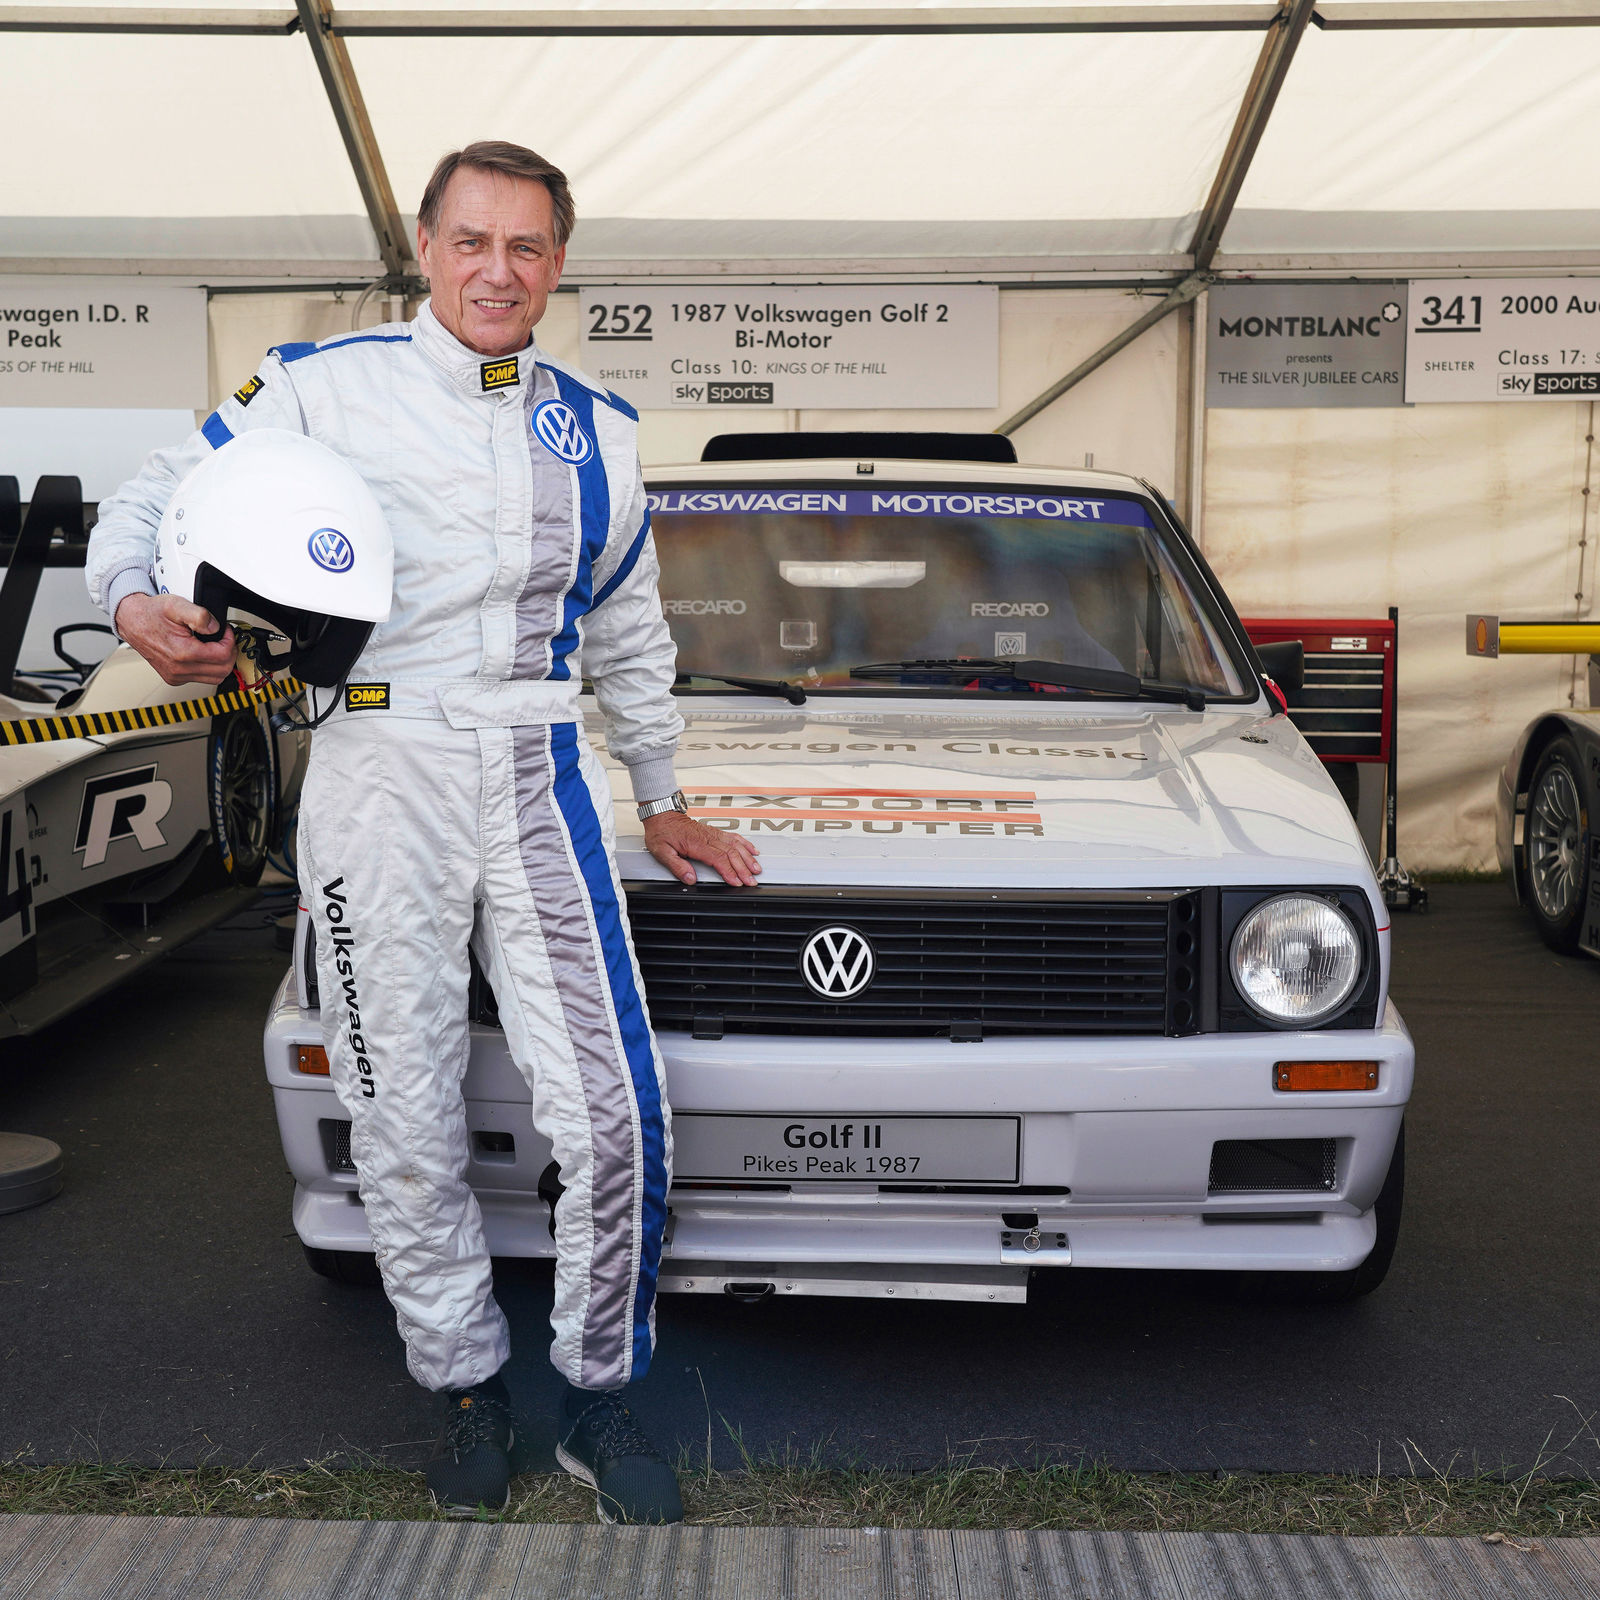 Dynamic duo: legendary rally driver Jochi Kleint with the twin-engine Golf Mk2 ‘Pikes Peak’ from 1987